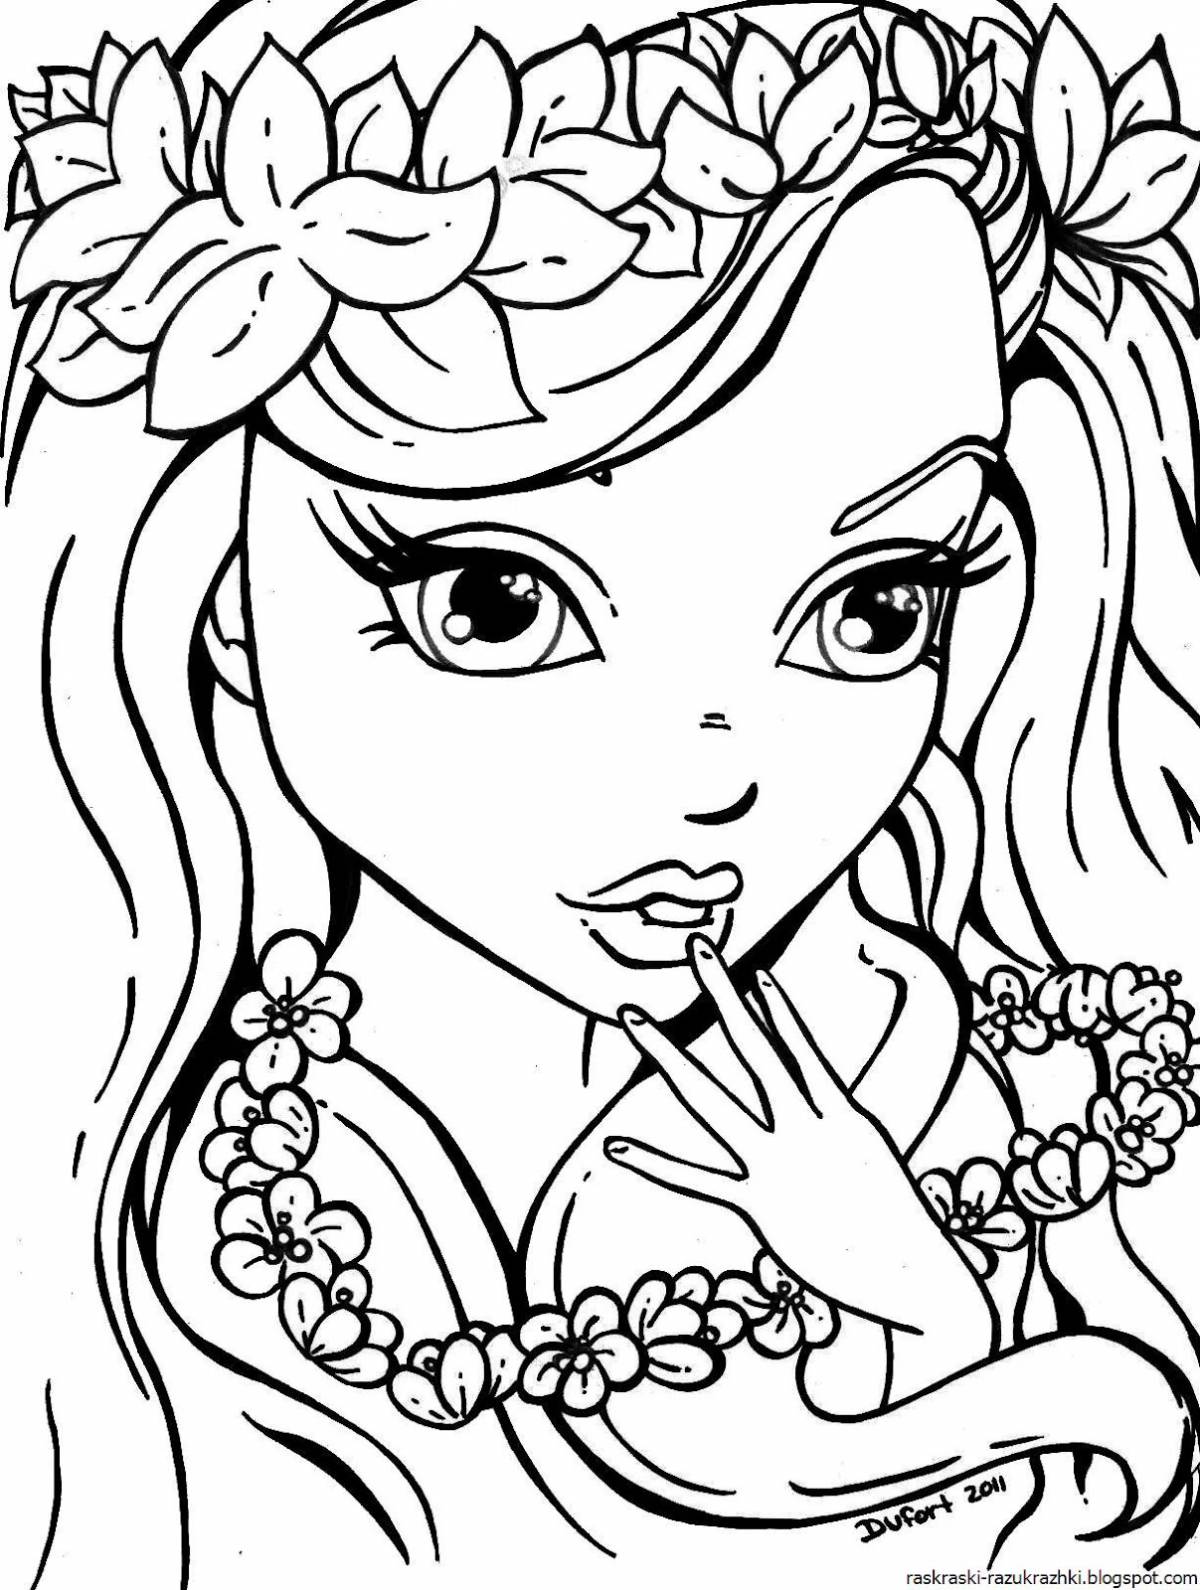 Coloring photo #5